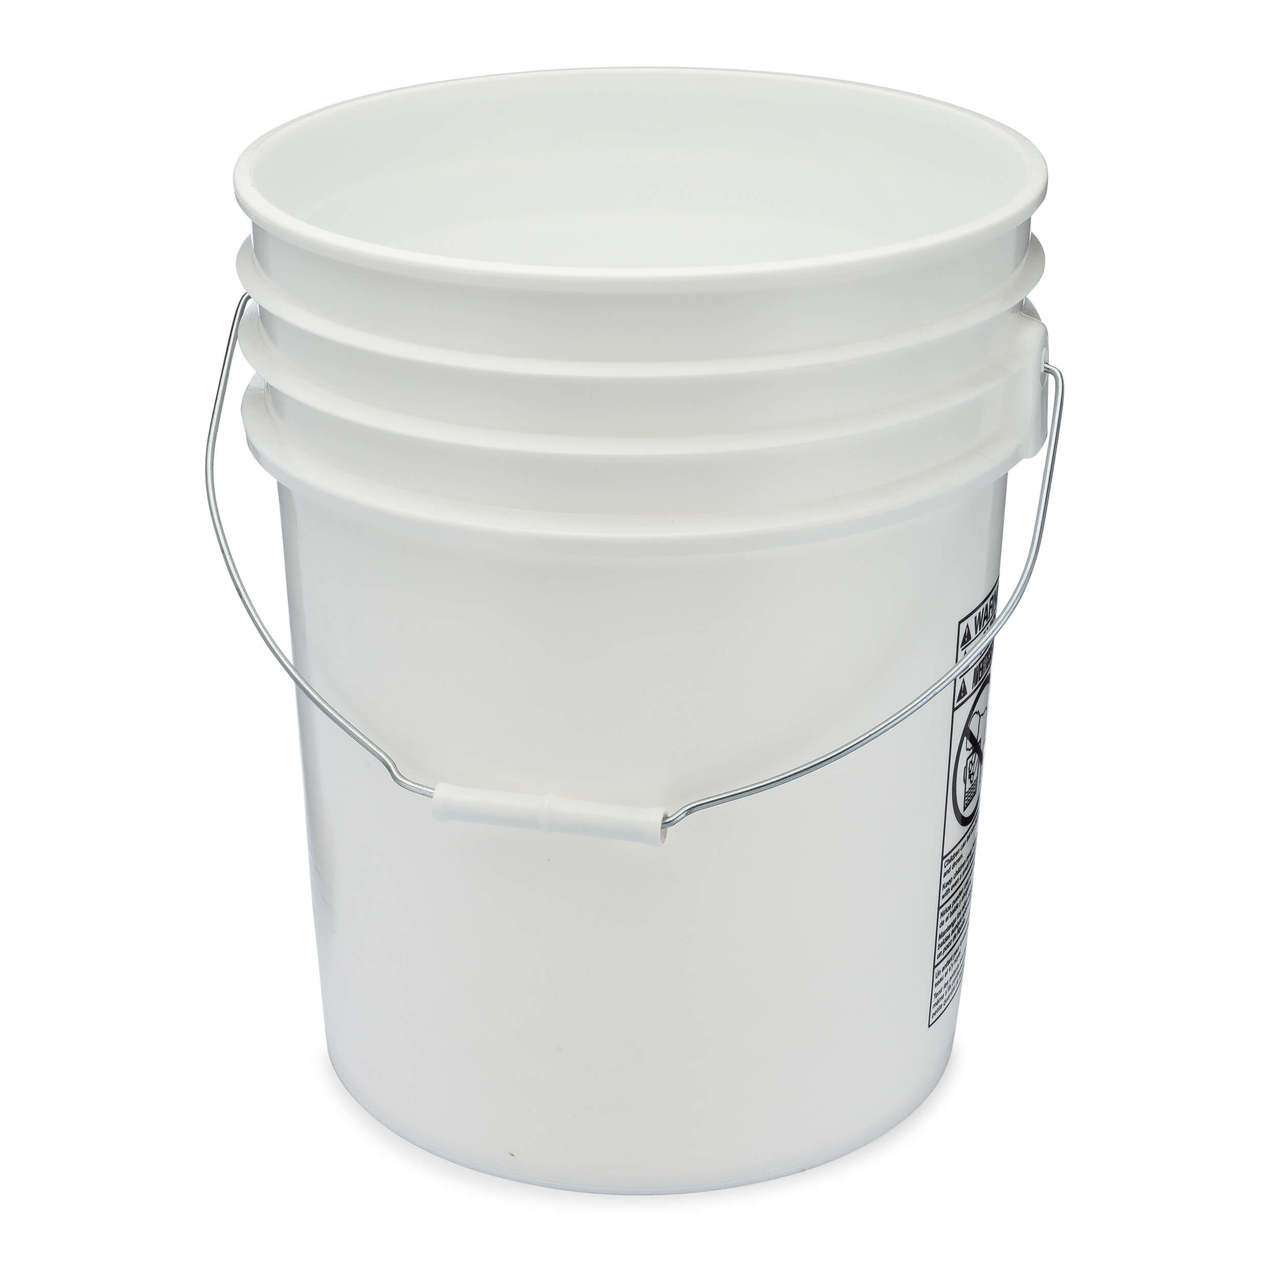 5 Gallon Plastic Pail- W/O Cover - Workplace Safety